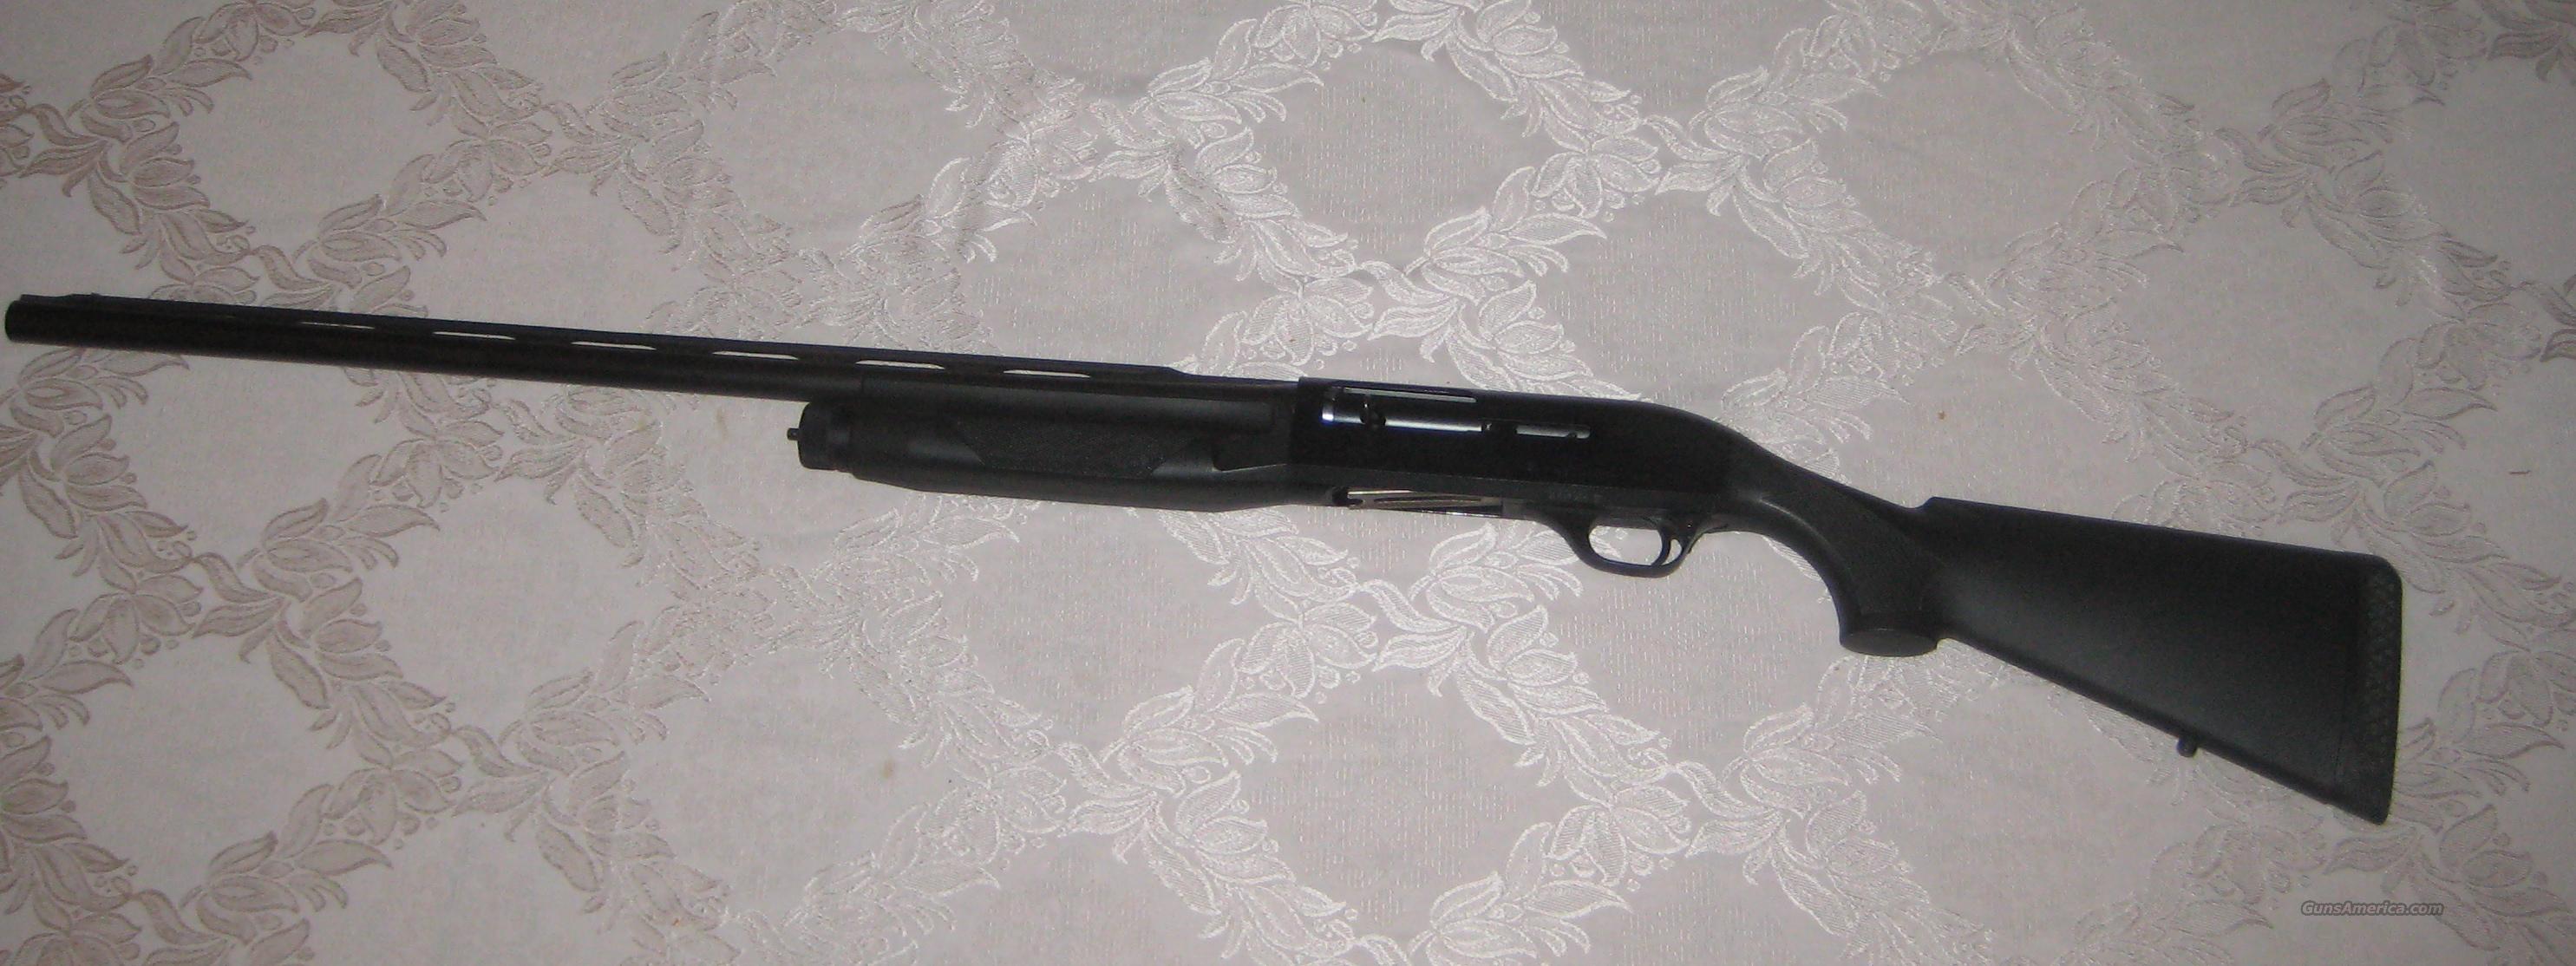 benelli m2 left handed